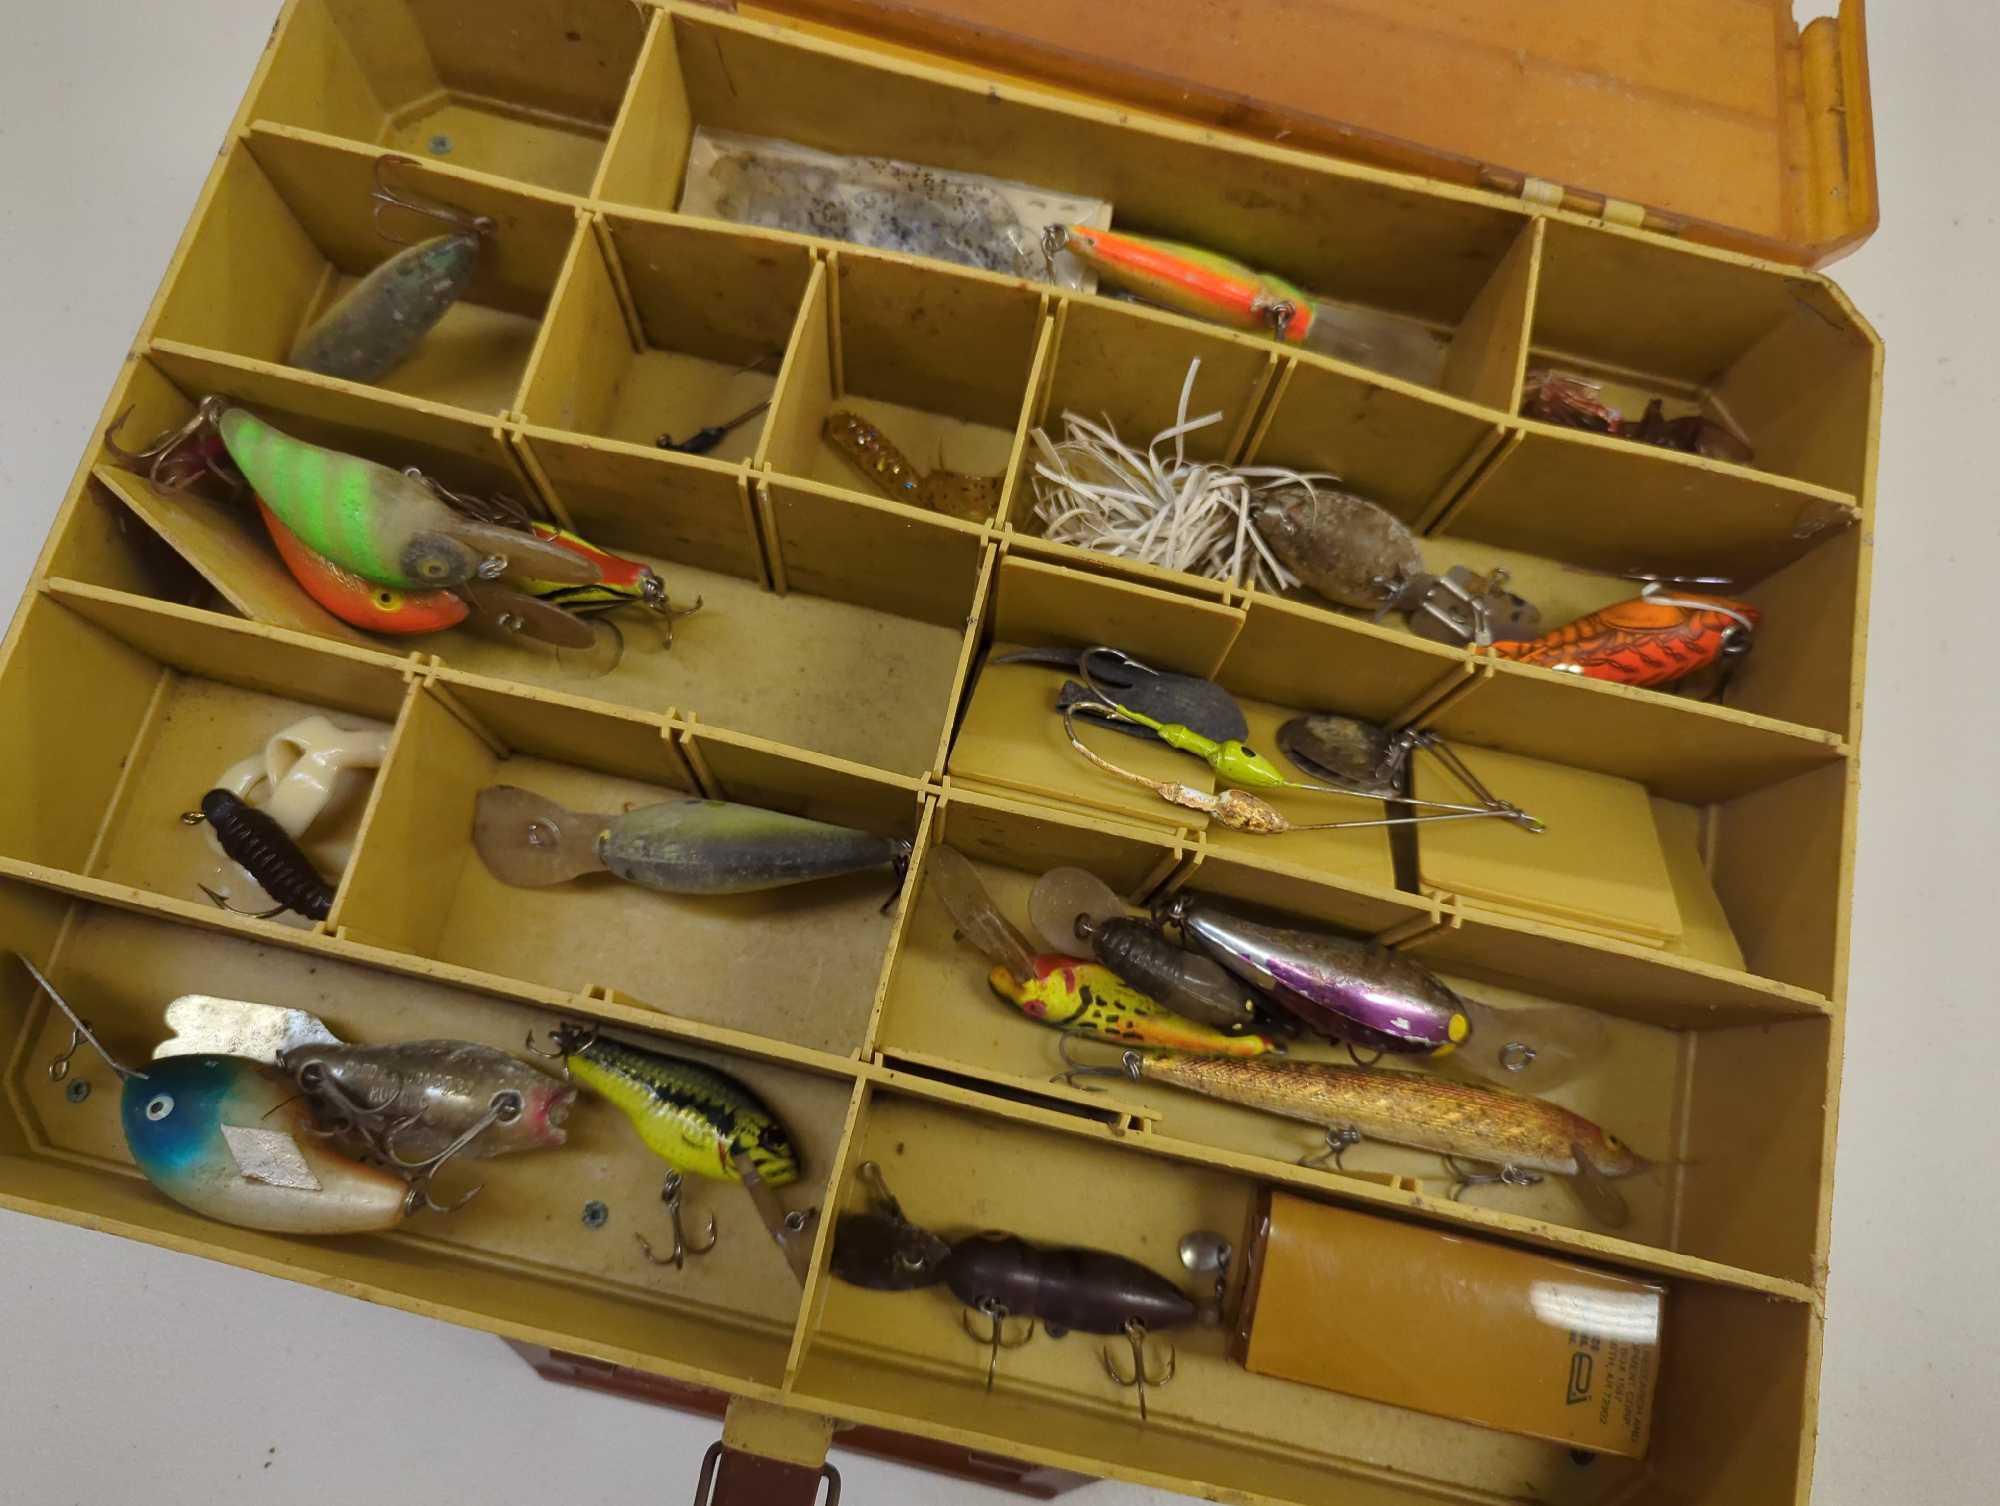 Dual-sided Tackle Box and contents including various fishing lures. Comes as is shown in photos.